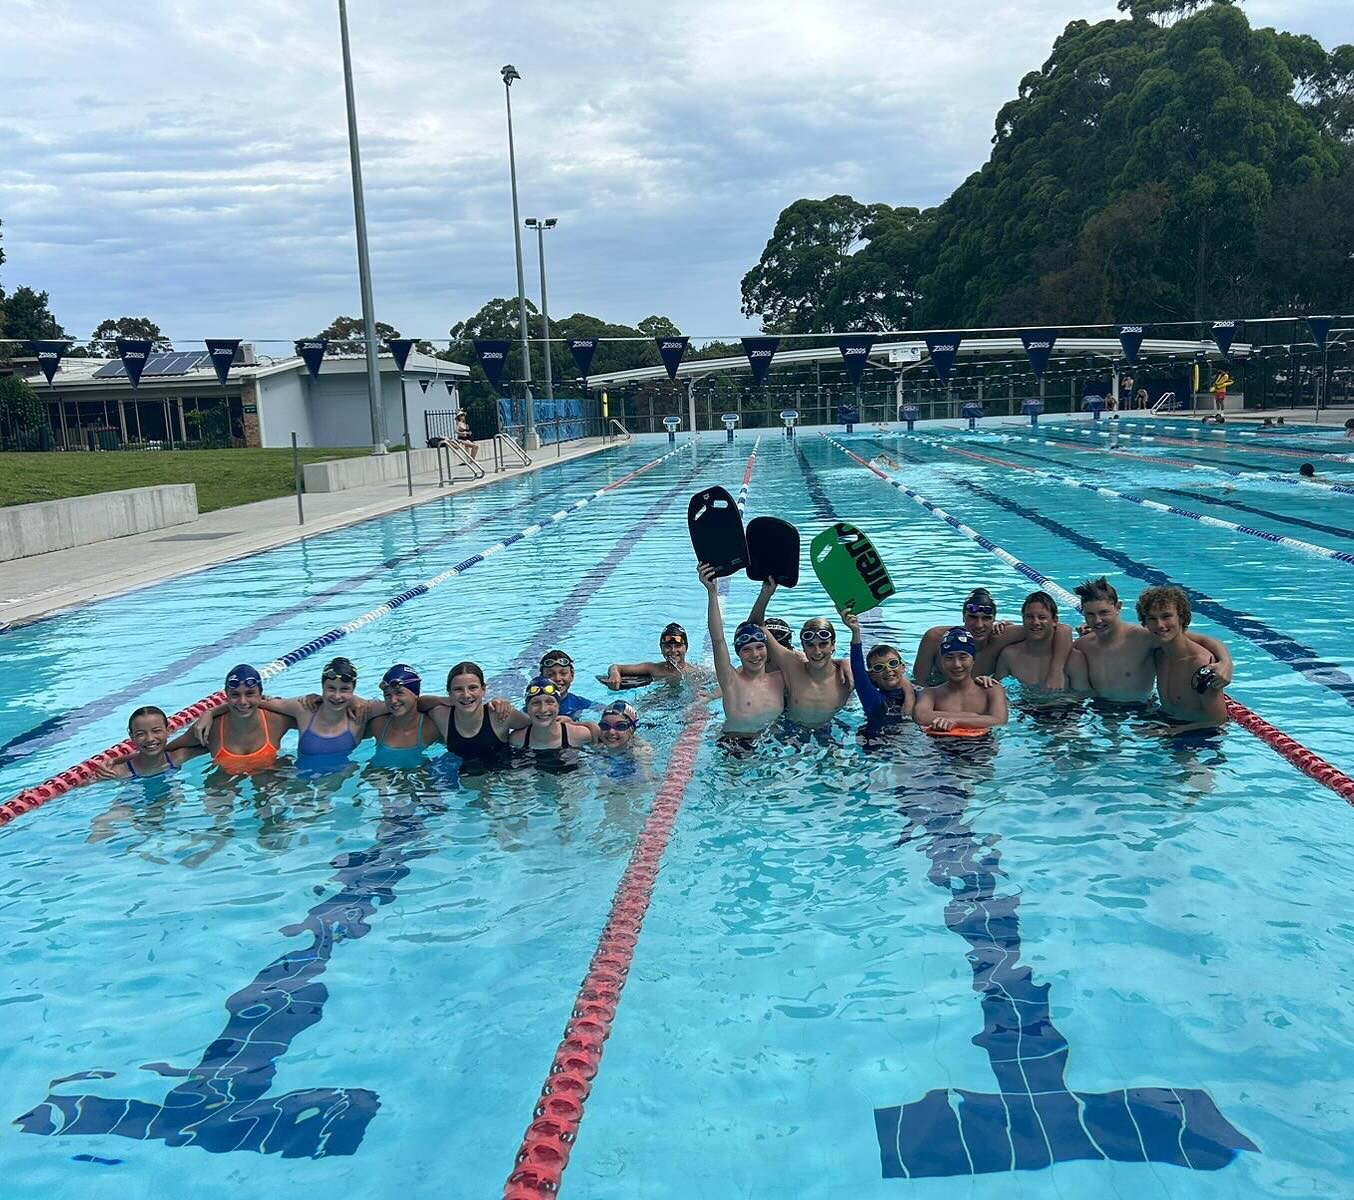 Wrapping up a FUN week of Swim Camp, designed to get our squad back into training and prepared for a busy season ahead! Great work and effort from all our swimmers! See you all back to normal training sessions and times from next week!